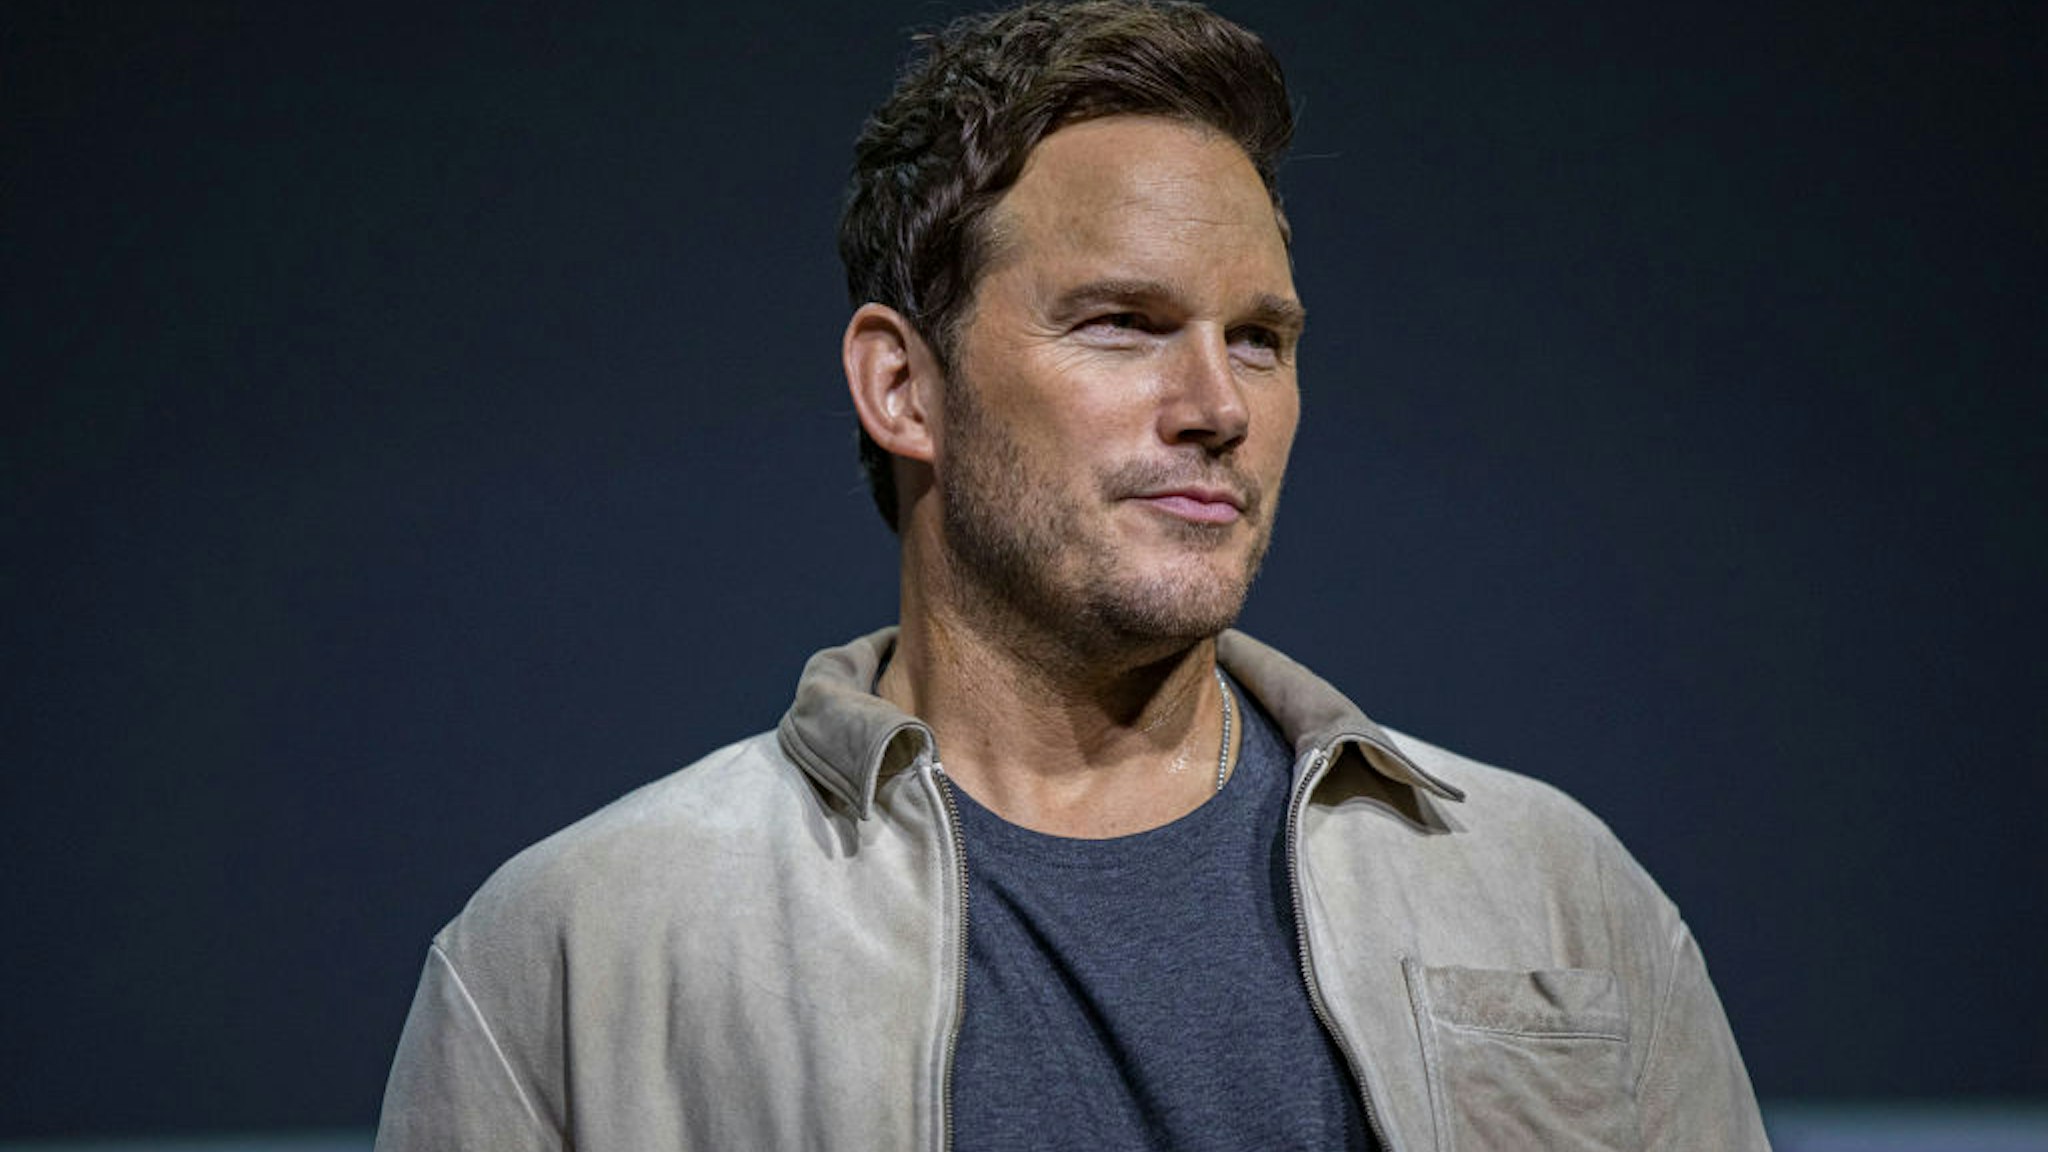 SAN DIEGO, CALIFORNIA - JULY 23: Chris Pratt speaks onstage at the Marvel Cinematic Universe Mega-Panel during 2022 Comic-Con International Day 3 at San Diego Convention Center on July 23, 2022 in San Diego, California. (Photo by Daniel Knighton/Getty Images)